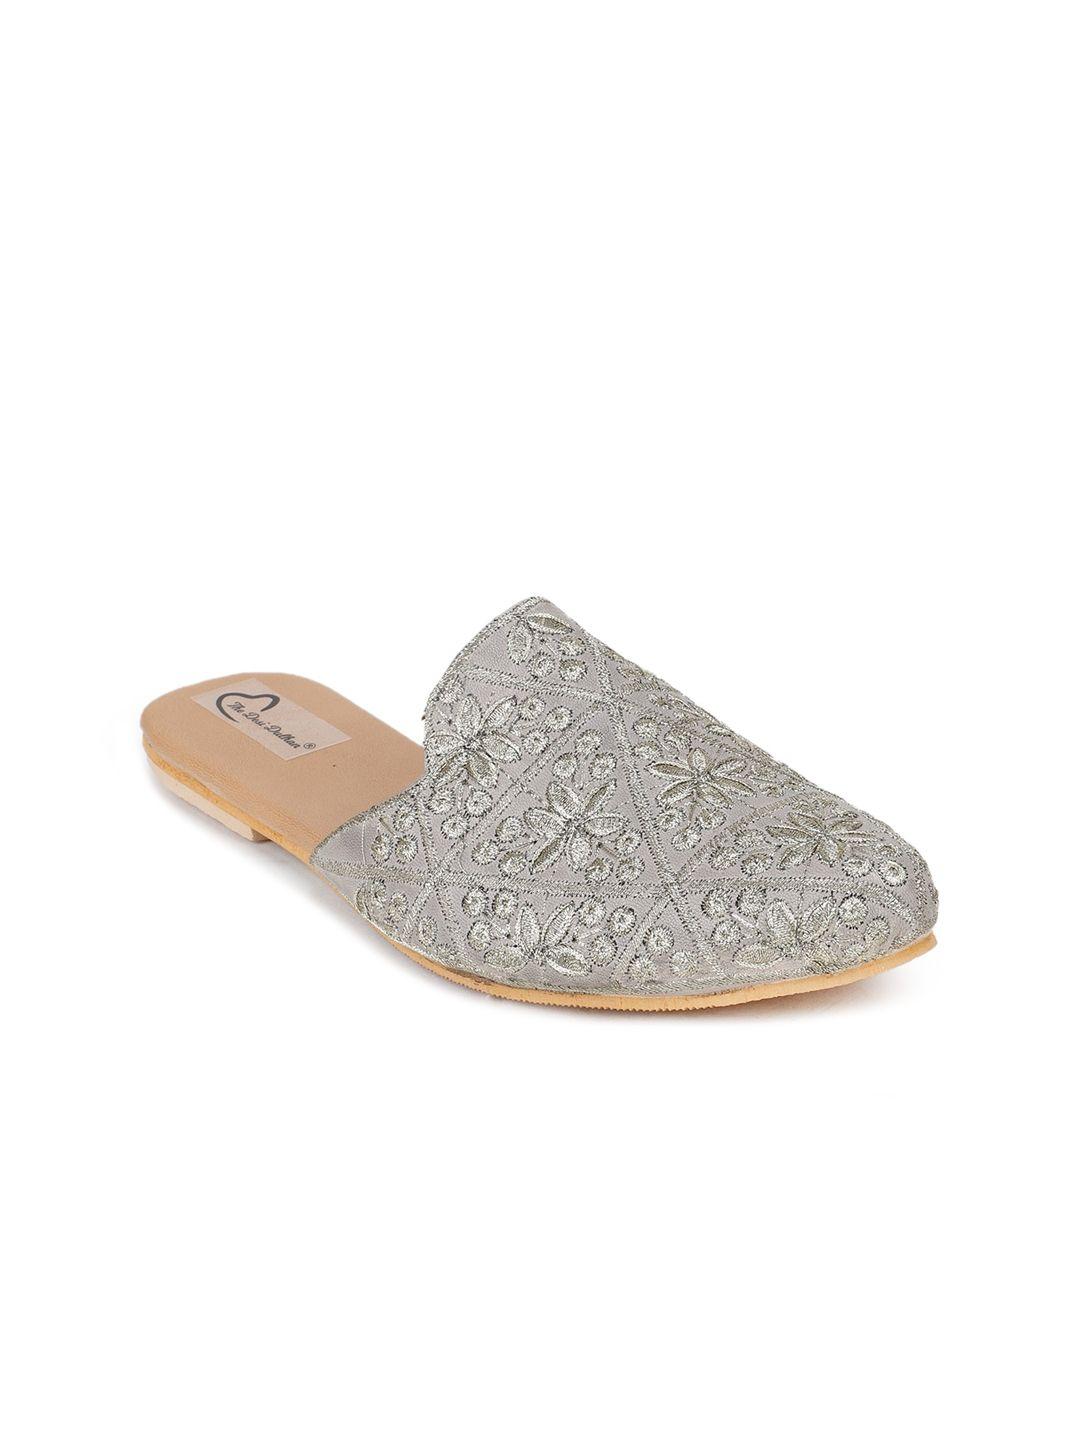 the-desi-dulhan-women-grey-textured-leather-ethnic-flats